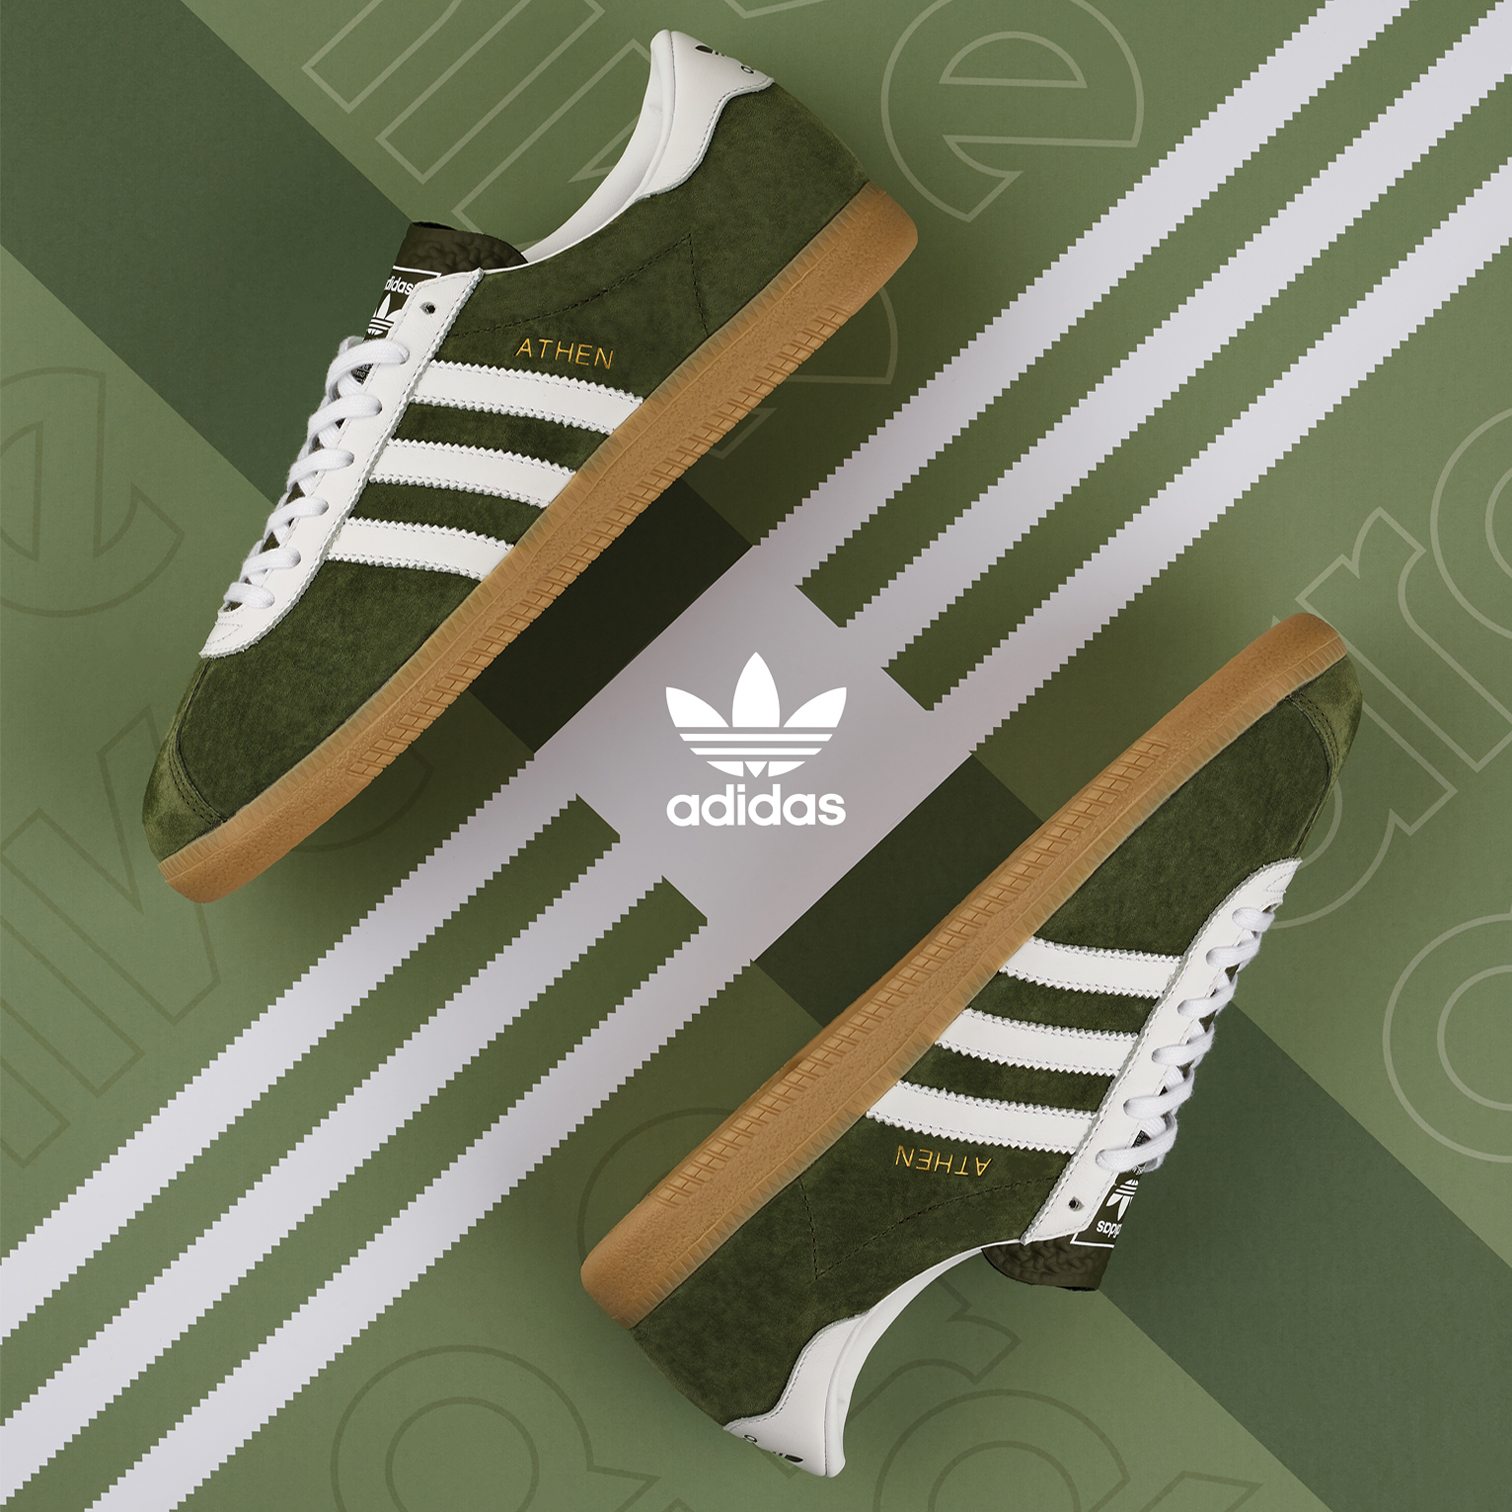 adidas Athen "Forest Green"